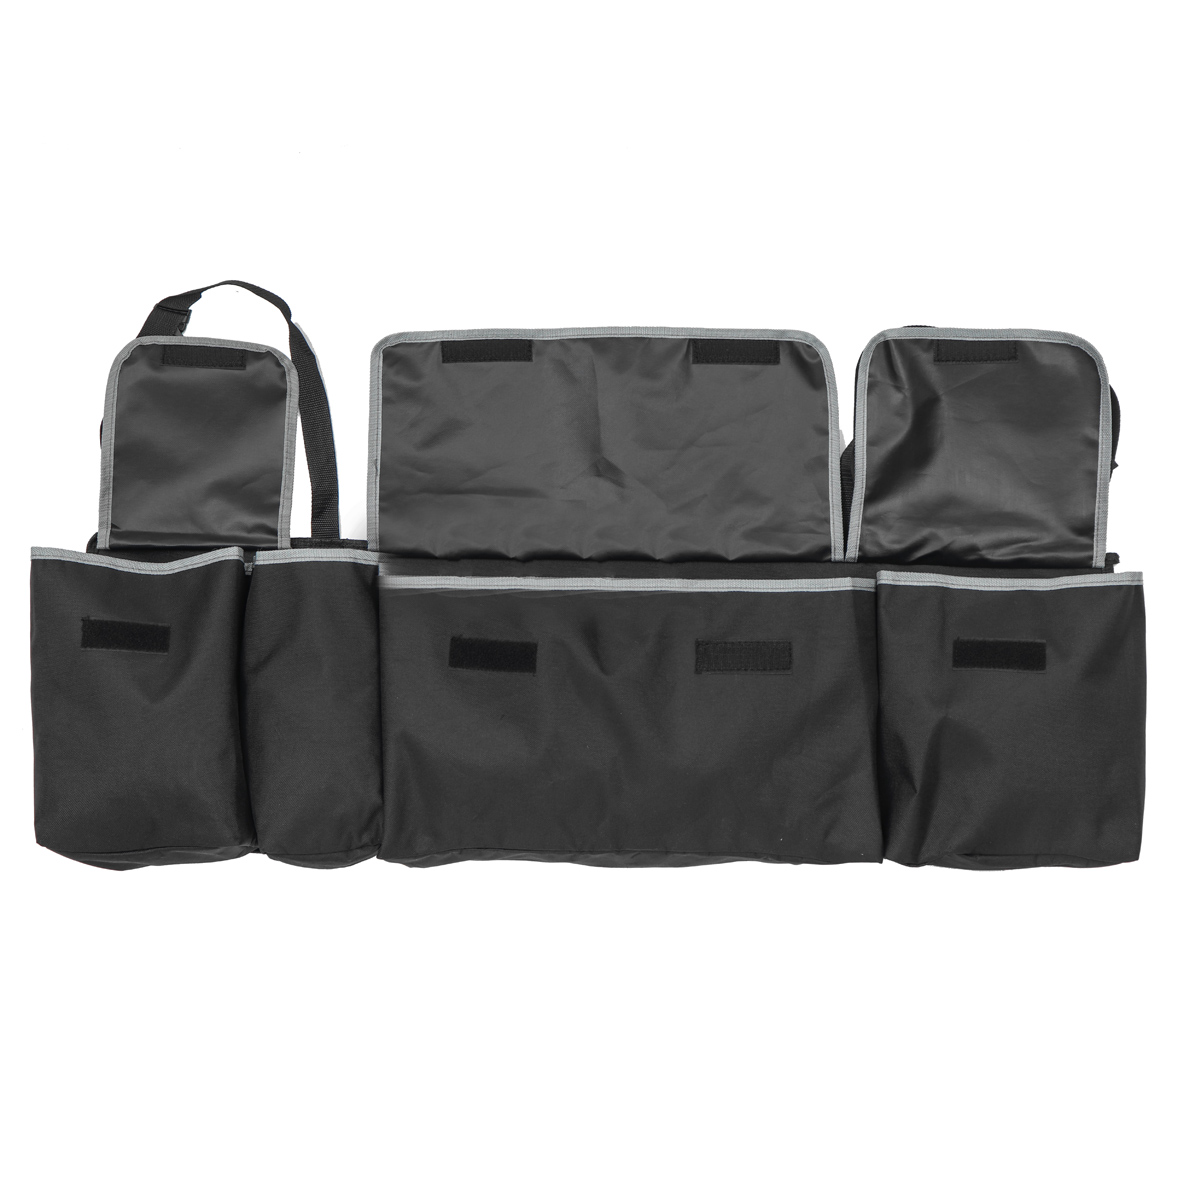 Outdoor-Travel-Car-Seat-Back-Storage-Bag-Hanging-Pack-Pouch-Rear-Trunk-Organizer-1434516-5